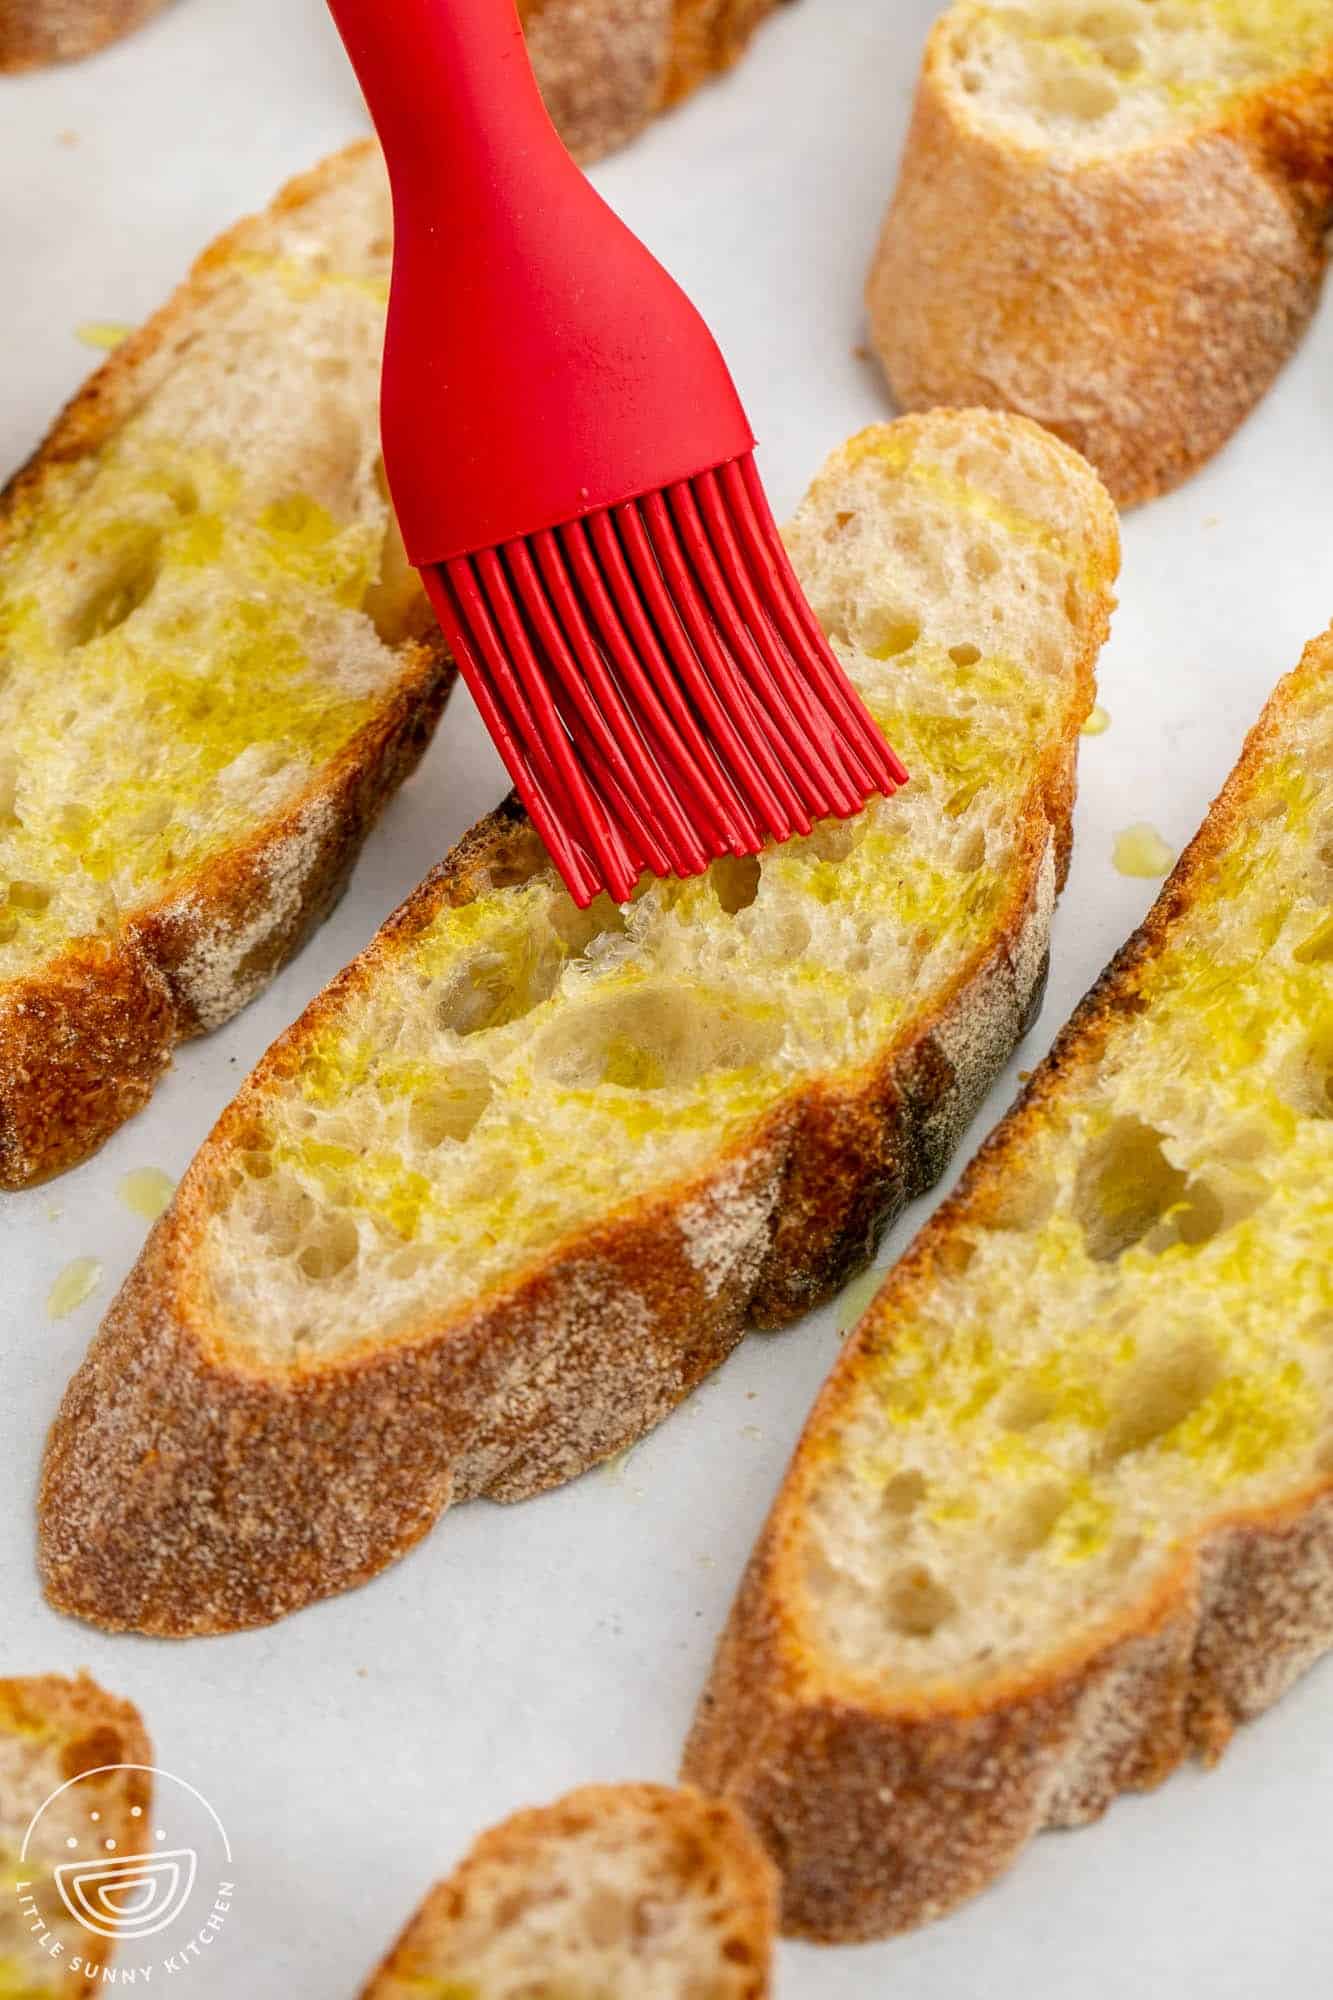 slices of bread on a tray. A red silicone brush is adding olive oil to them.